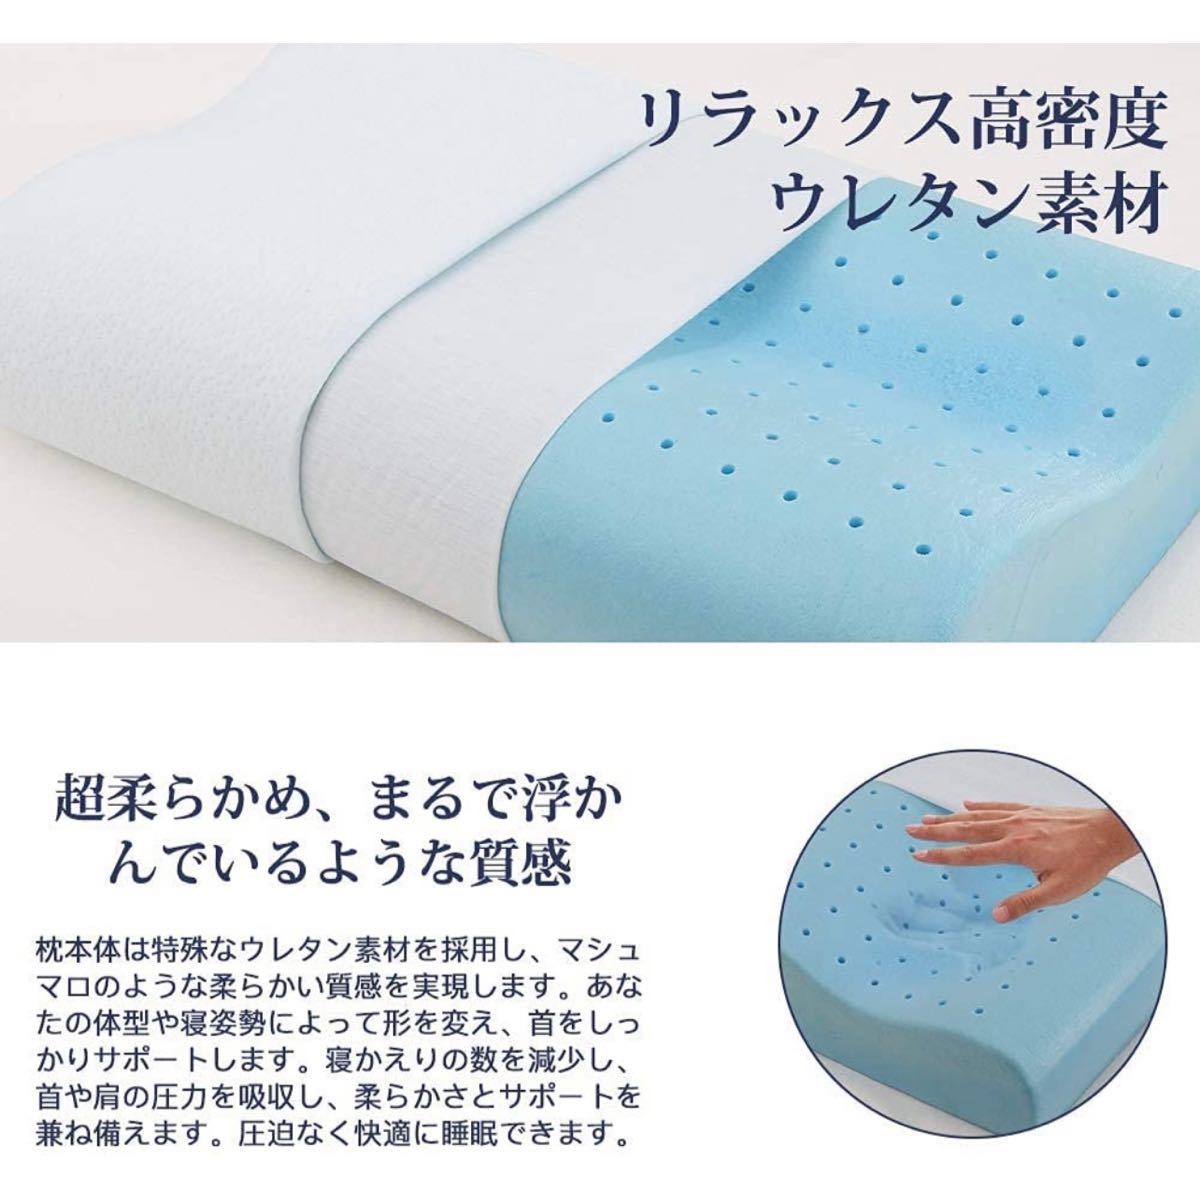  pillow low repulsion pillow two -step height ventilation eminent head *.* shoulder ..... main .... pillow 